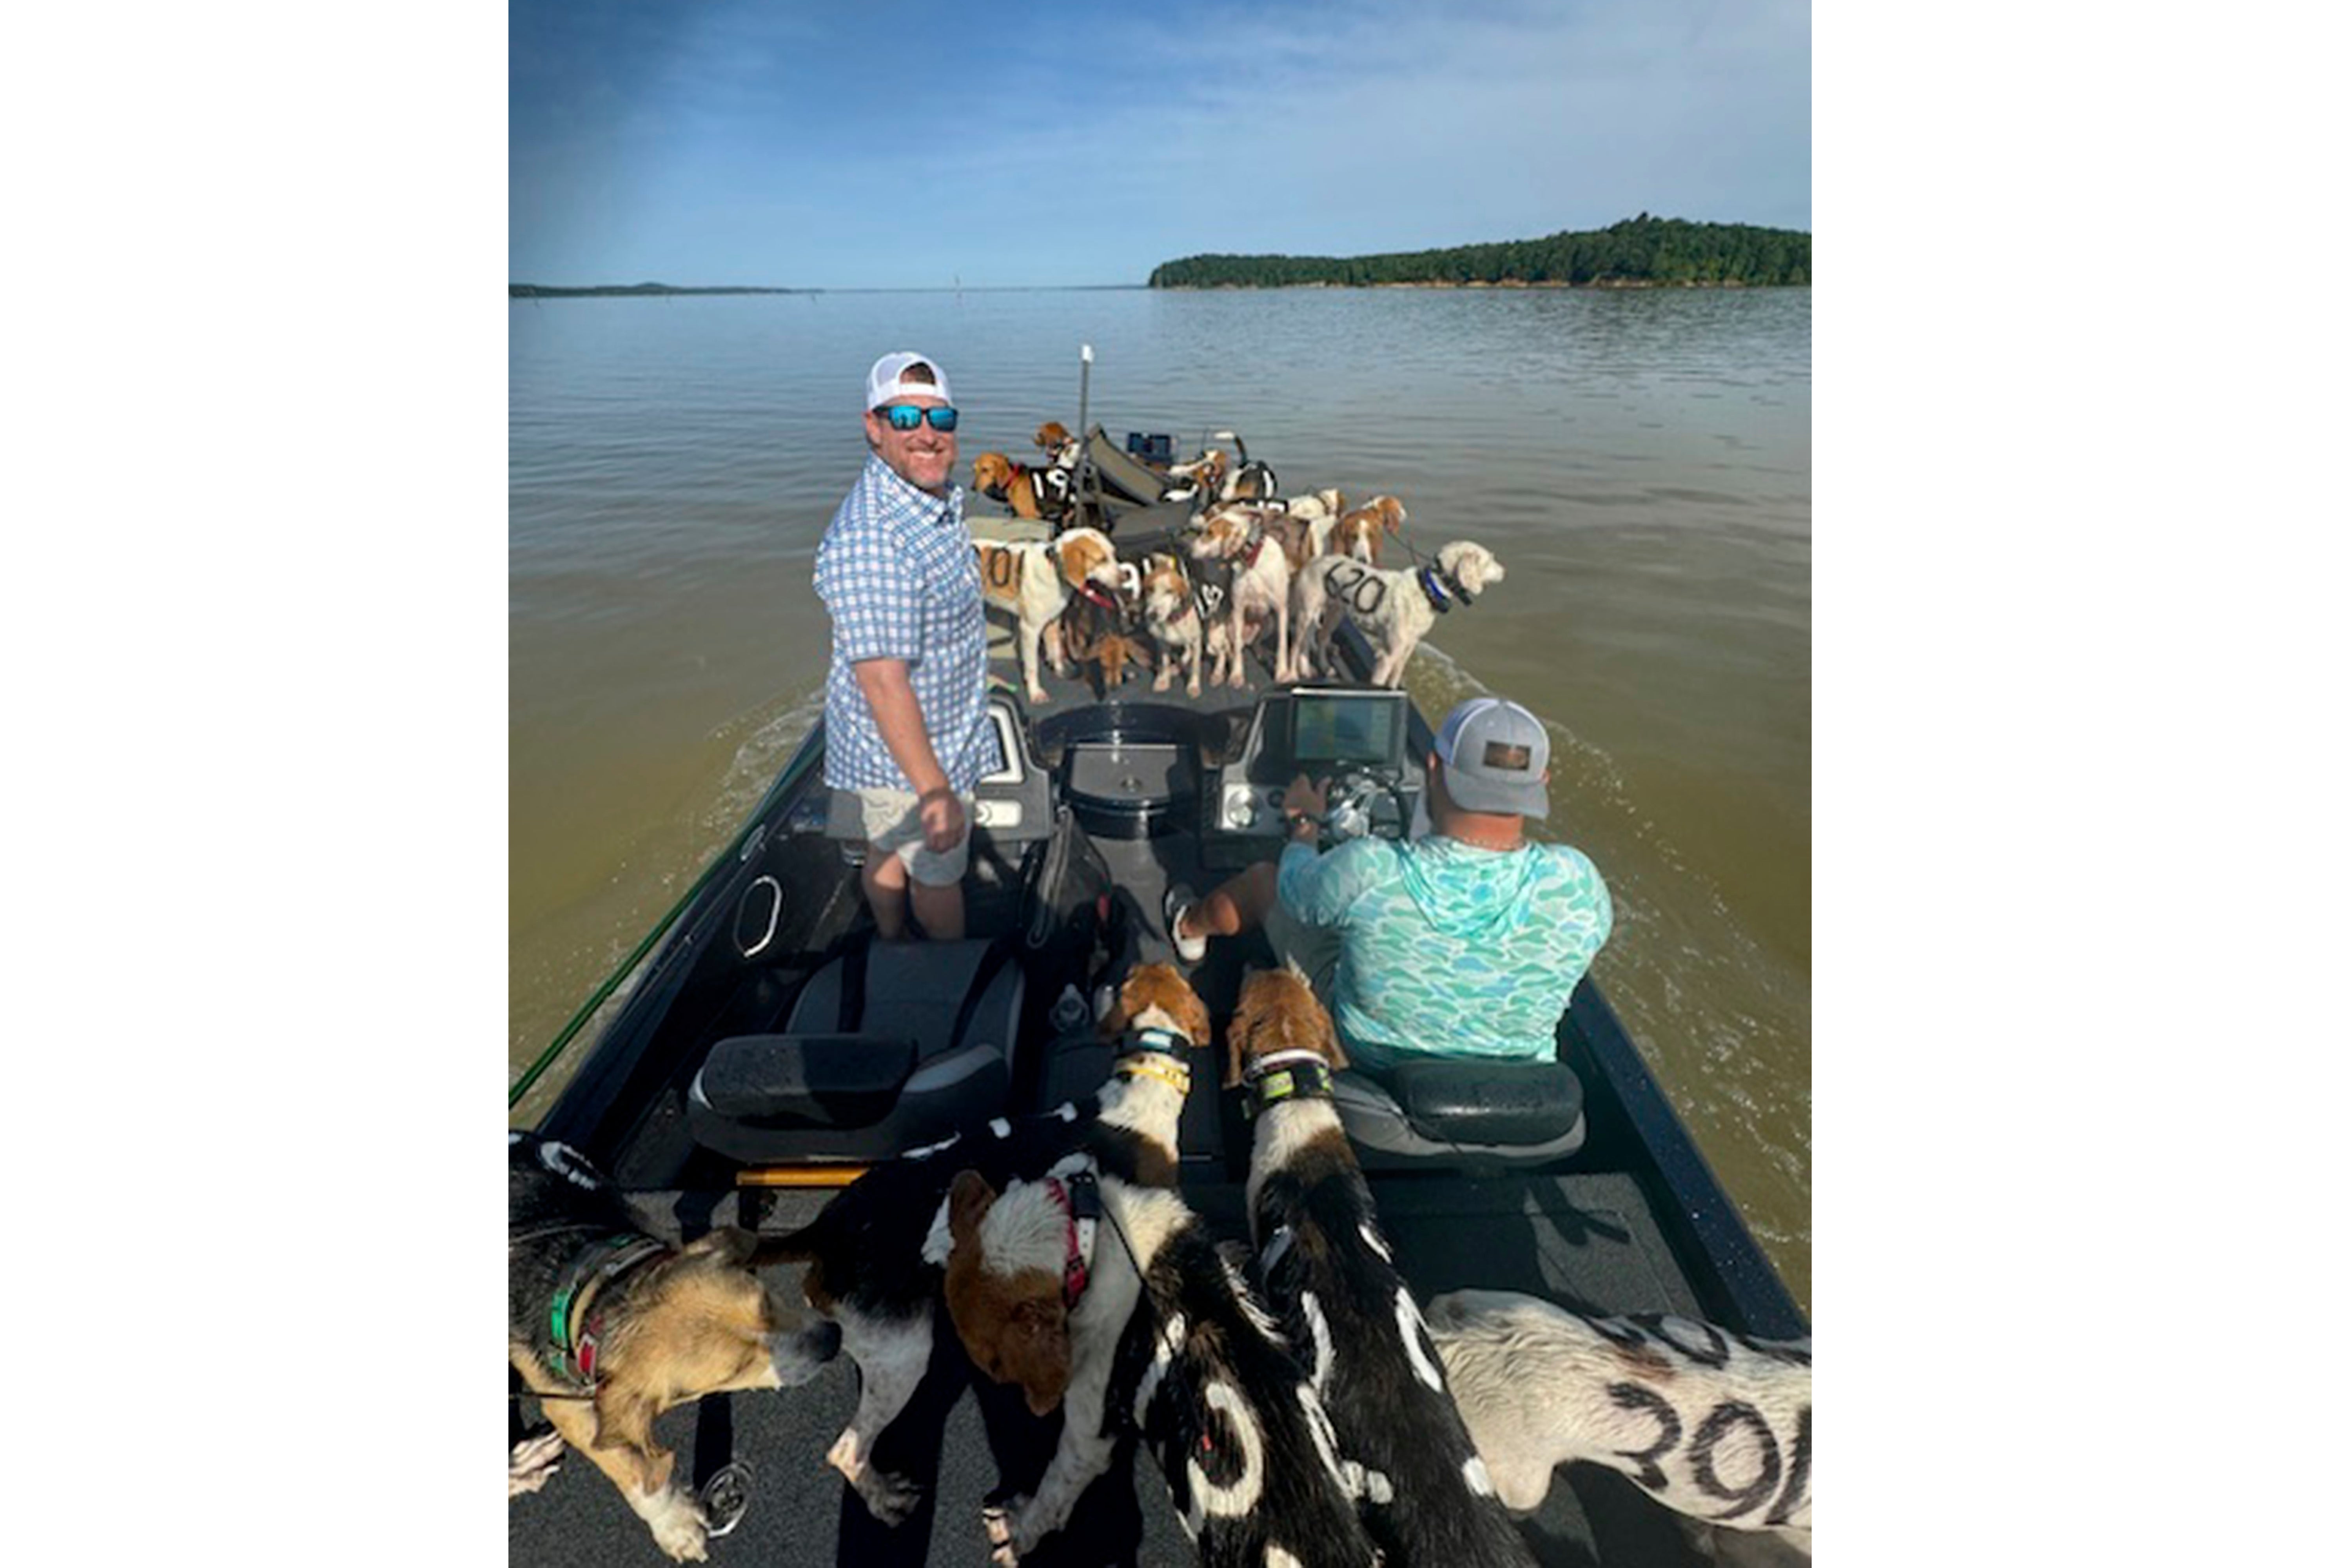 Fisherman Brad Carlisle, left, and fishing guide Jordan Chrestman bring one of three boatloads of dogs back to shore after they were found struggling to stay above water far out in Mississippi’s Grenada Lake